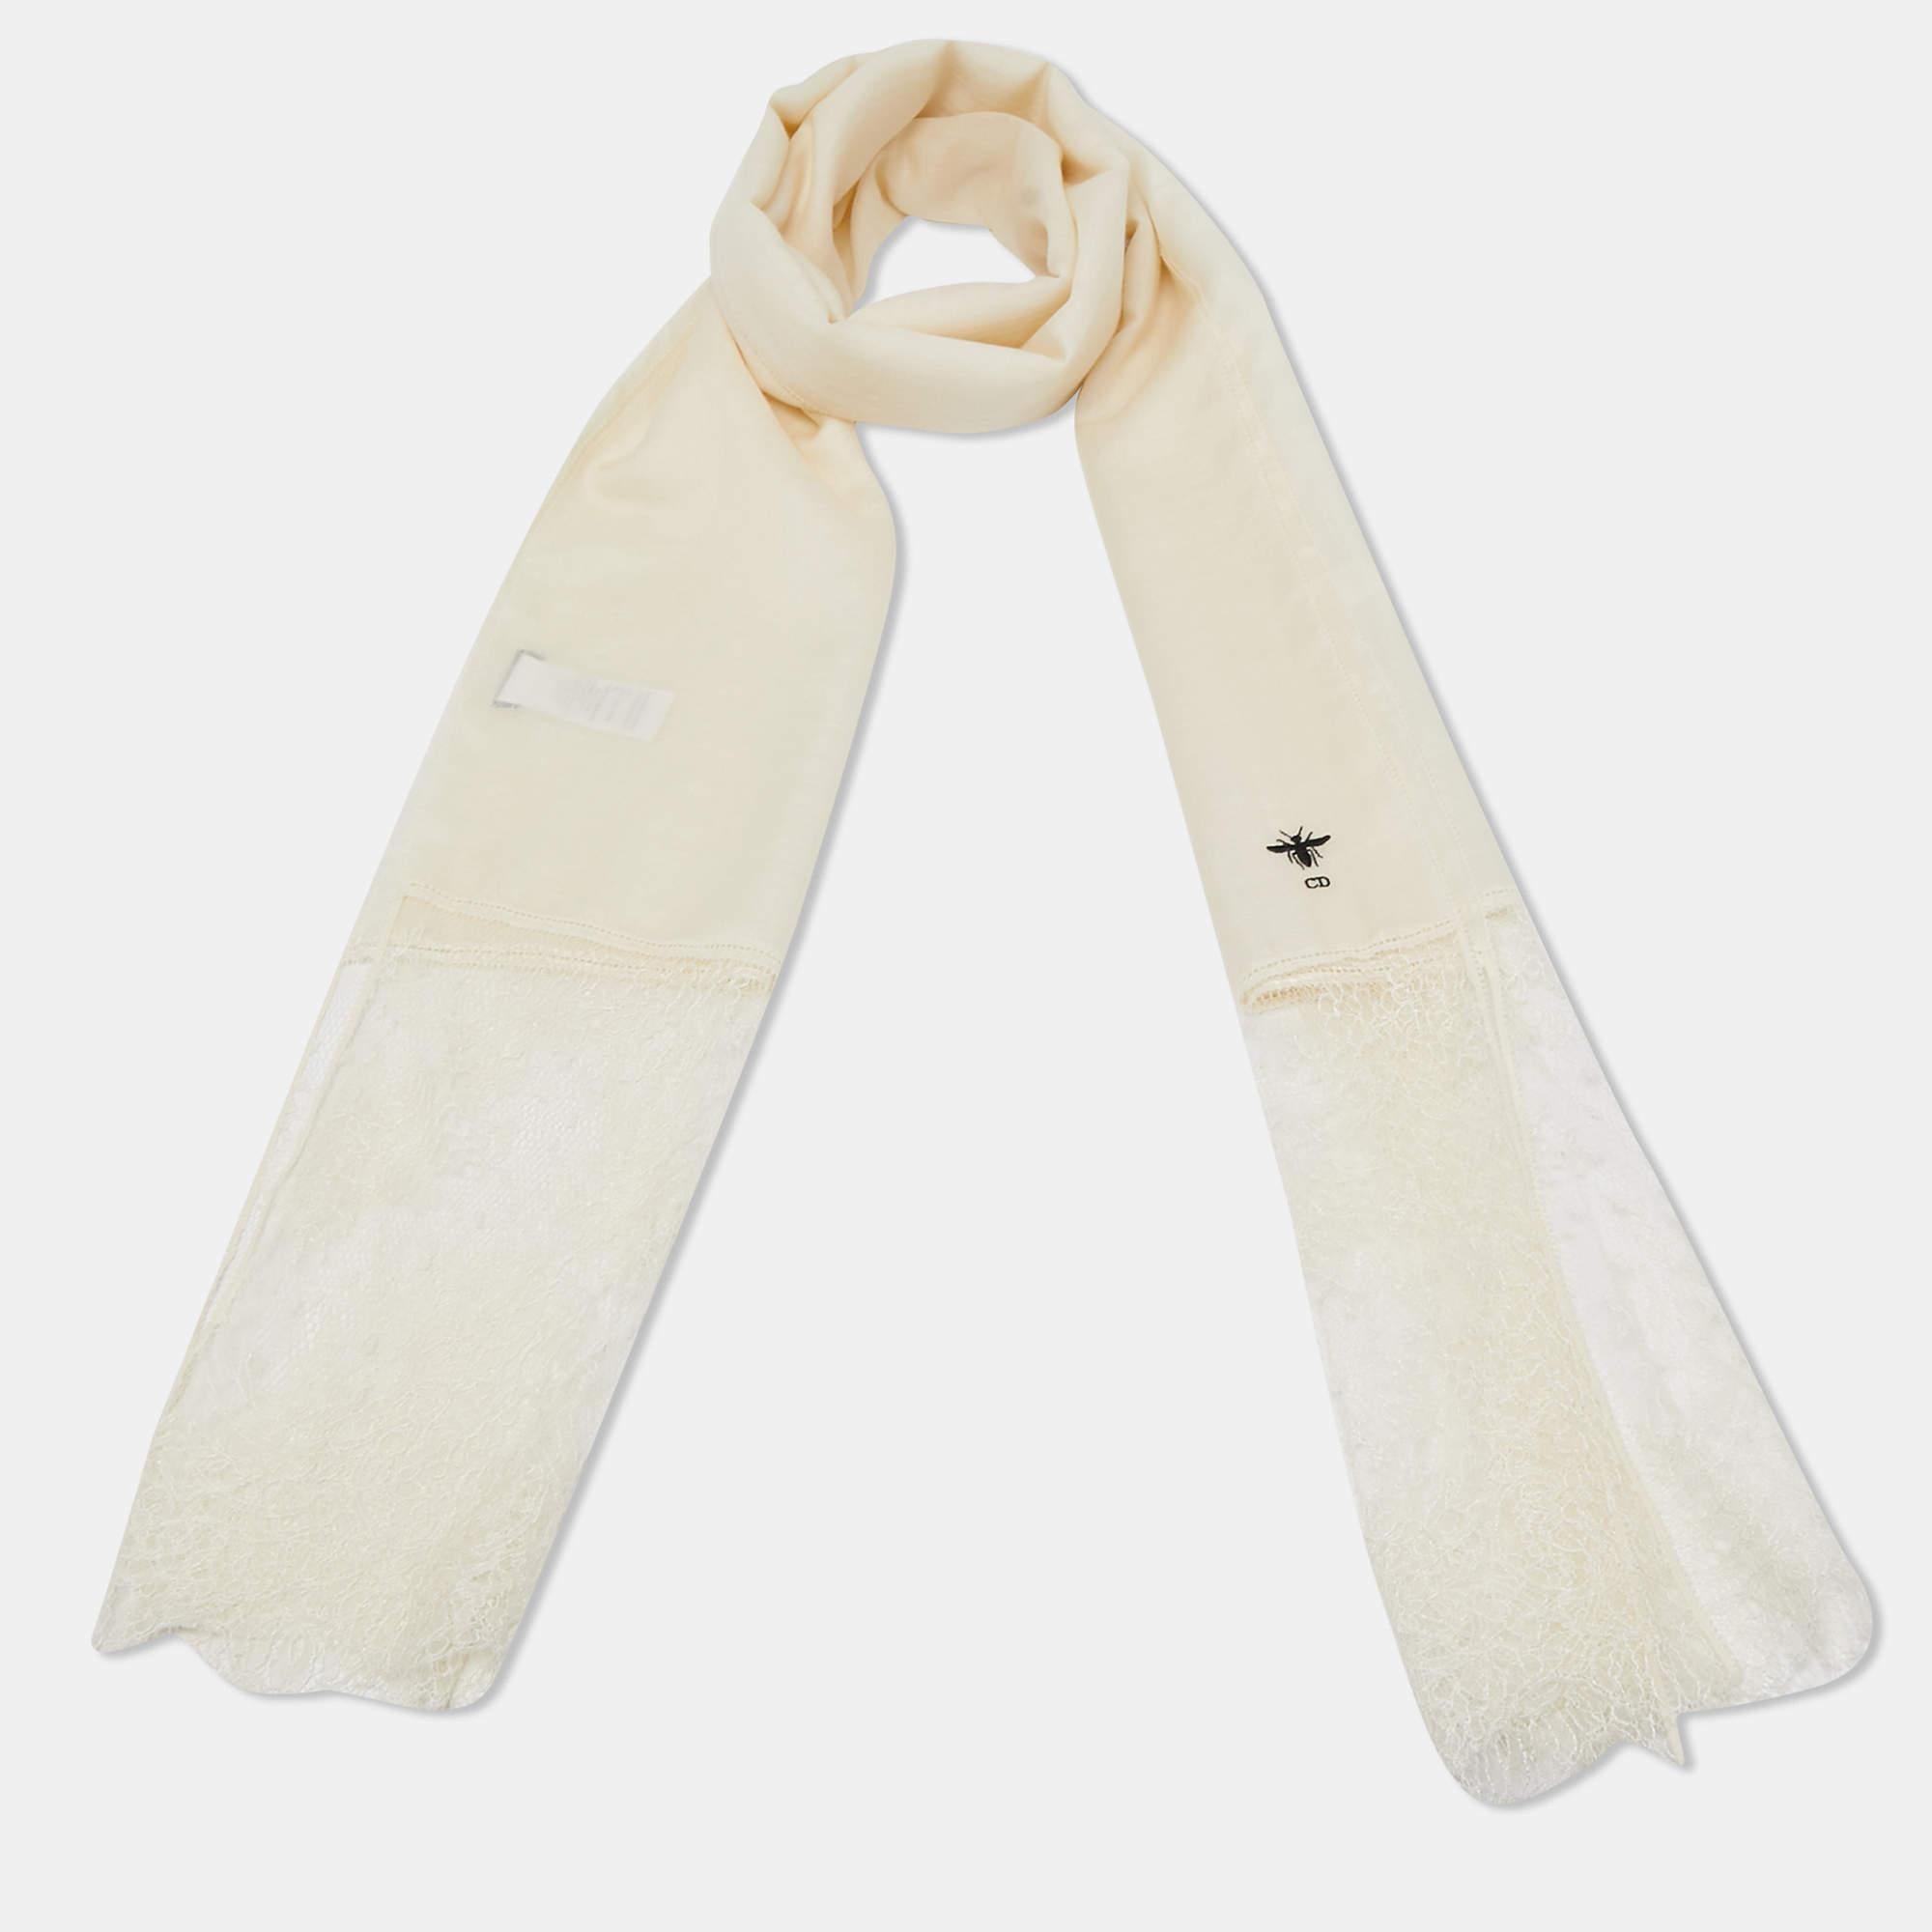 Classy and stylish are some words that come to our minds when we look at the stole. The label brings you this versatile creation made from luxurious materials that you style with many outfits.

